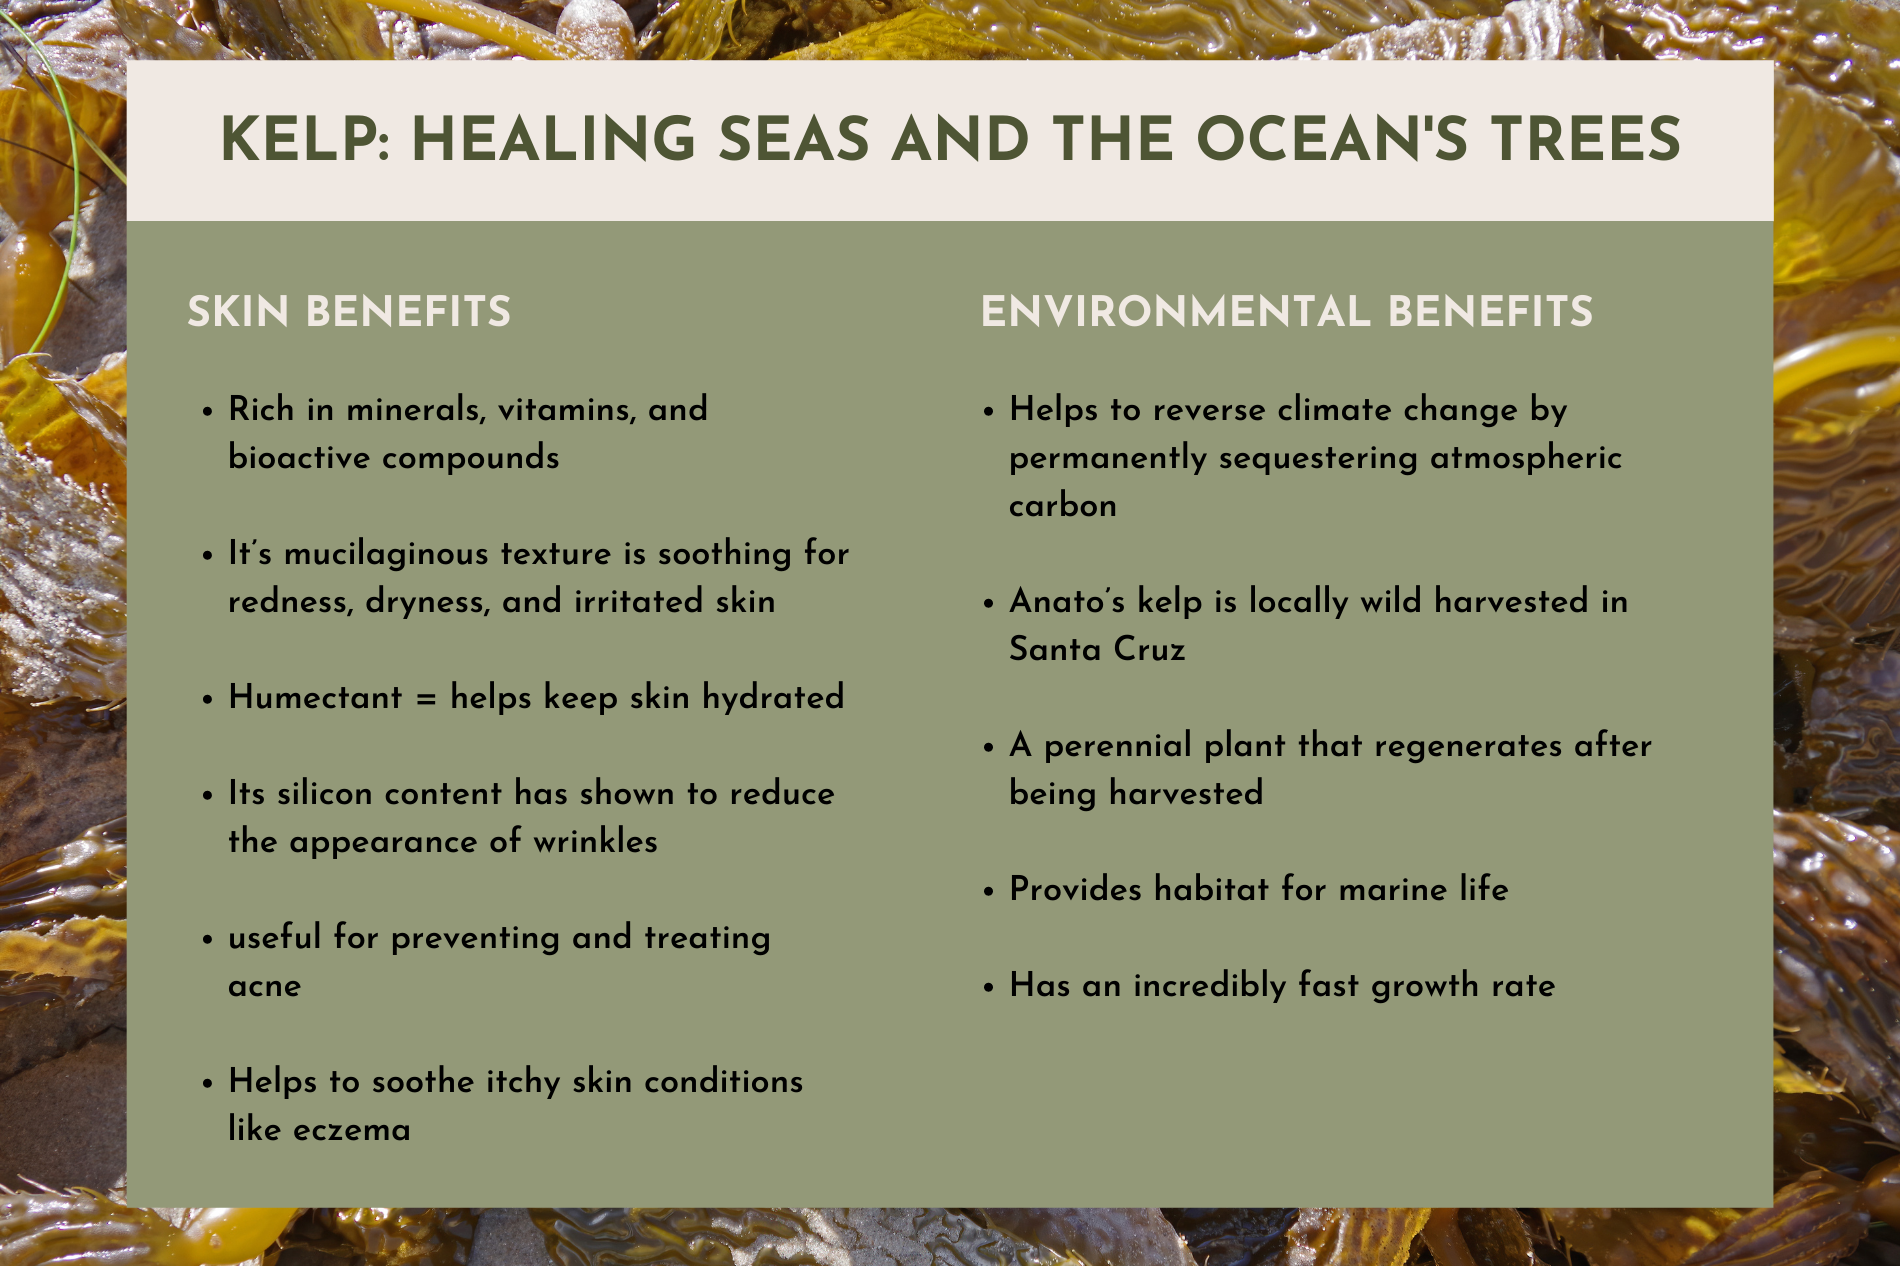 KELP: HEALING SEAS AND THE OCEAN'S TREES health benefits of trees: Rich in minerals, vitamins, and bioactive compounds  It’s mucilaginous texture is soothing for redness, dryness, and irritated skin  Humectant = helps keep skin hydrated  Its silicon content has shown to reduce the appearance of wrinkles  useful for preventing and treating acne  Helps to soothe itchy skin conditions like eczema Helps to reverse climate change by permanently sequestering atmospheric carbon  Anato’s kelp is locally wild harvested in Santa Cruz  A perennial plant that regenerates after being harvested  Provides habitat for marine life  Has an incredibly fast growth rate